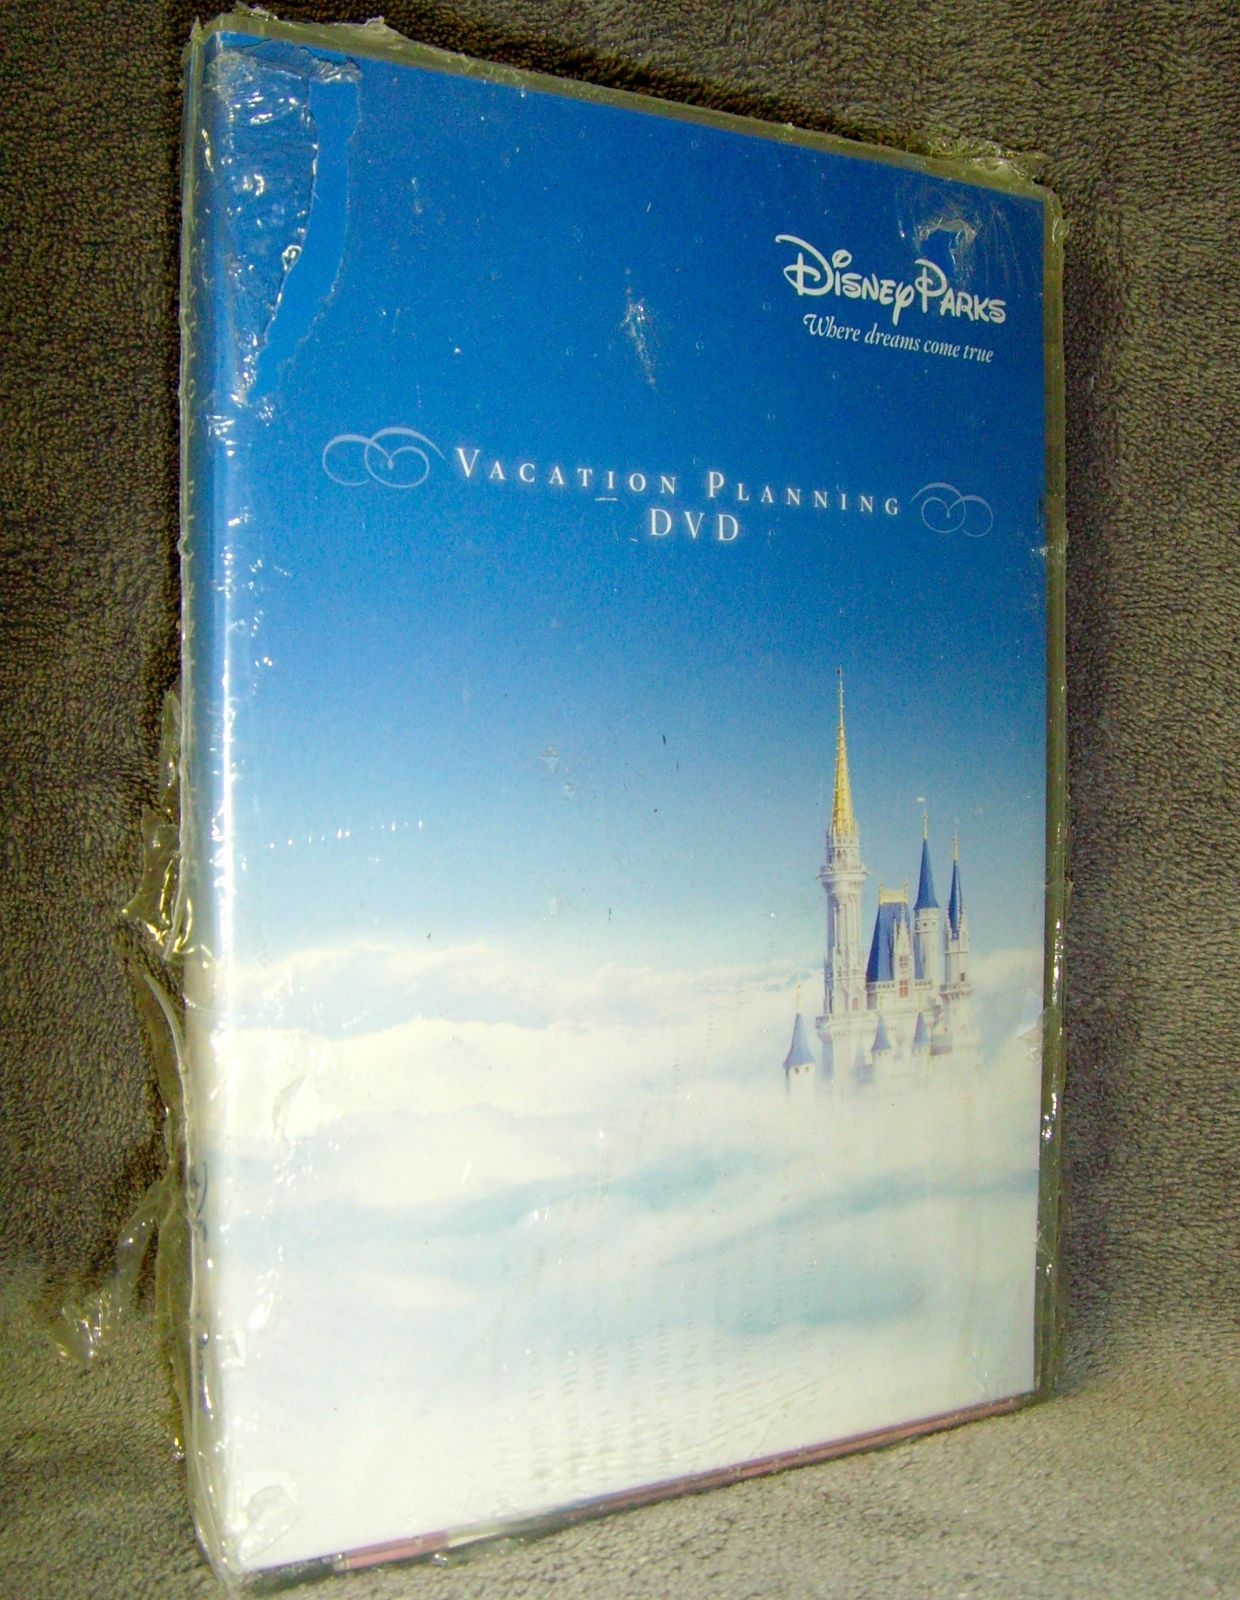 Disney Parks: Where Dreams Come True - Vacation Planning DVD (DVD, 2007)  NEW!